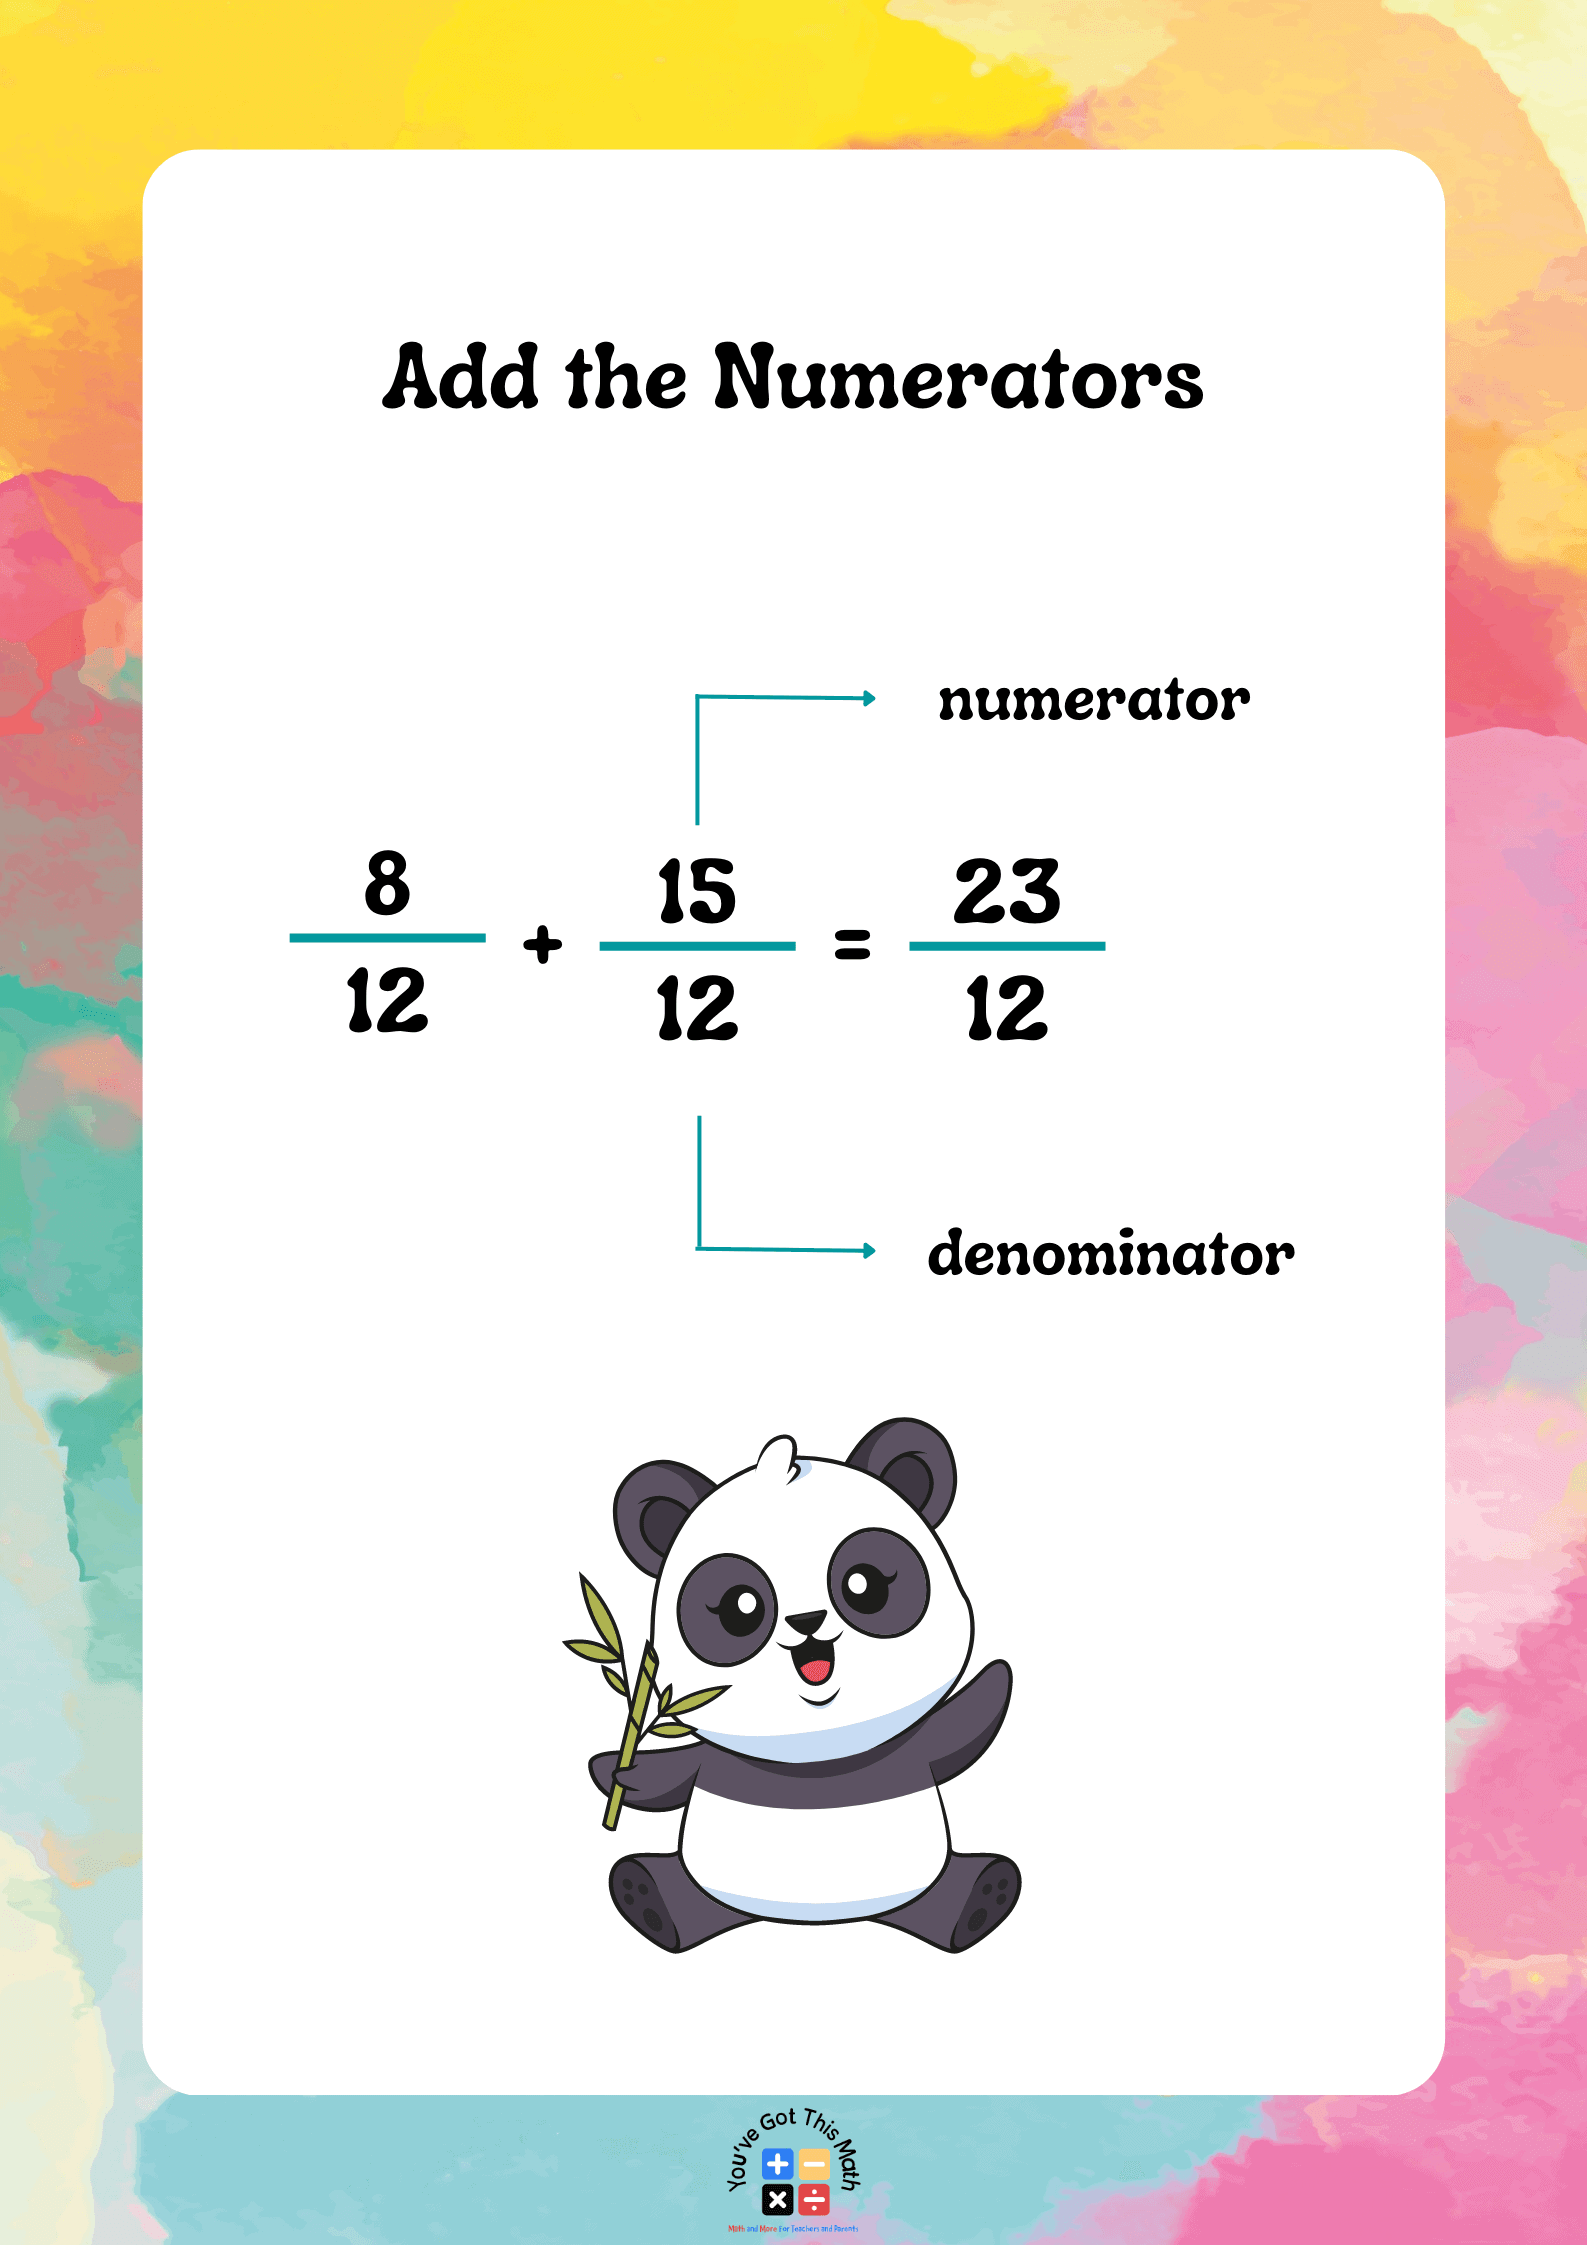 Adding Numerators for adding and subtracting fractions wit regrouping worksheets